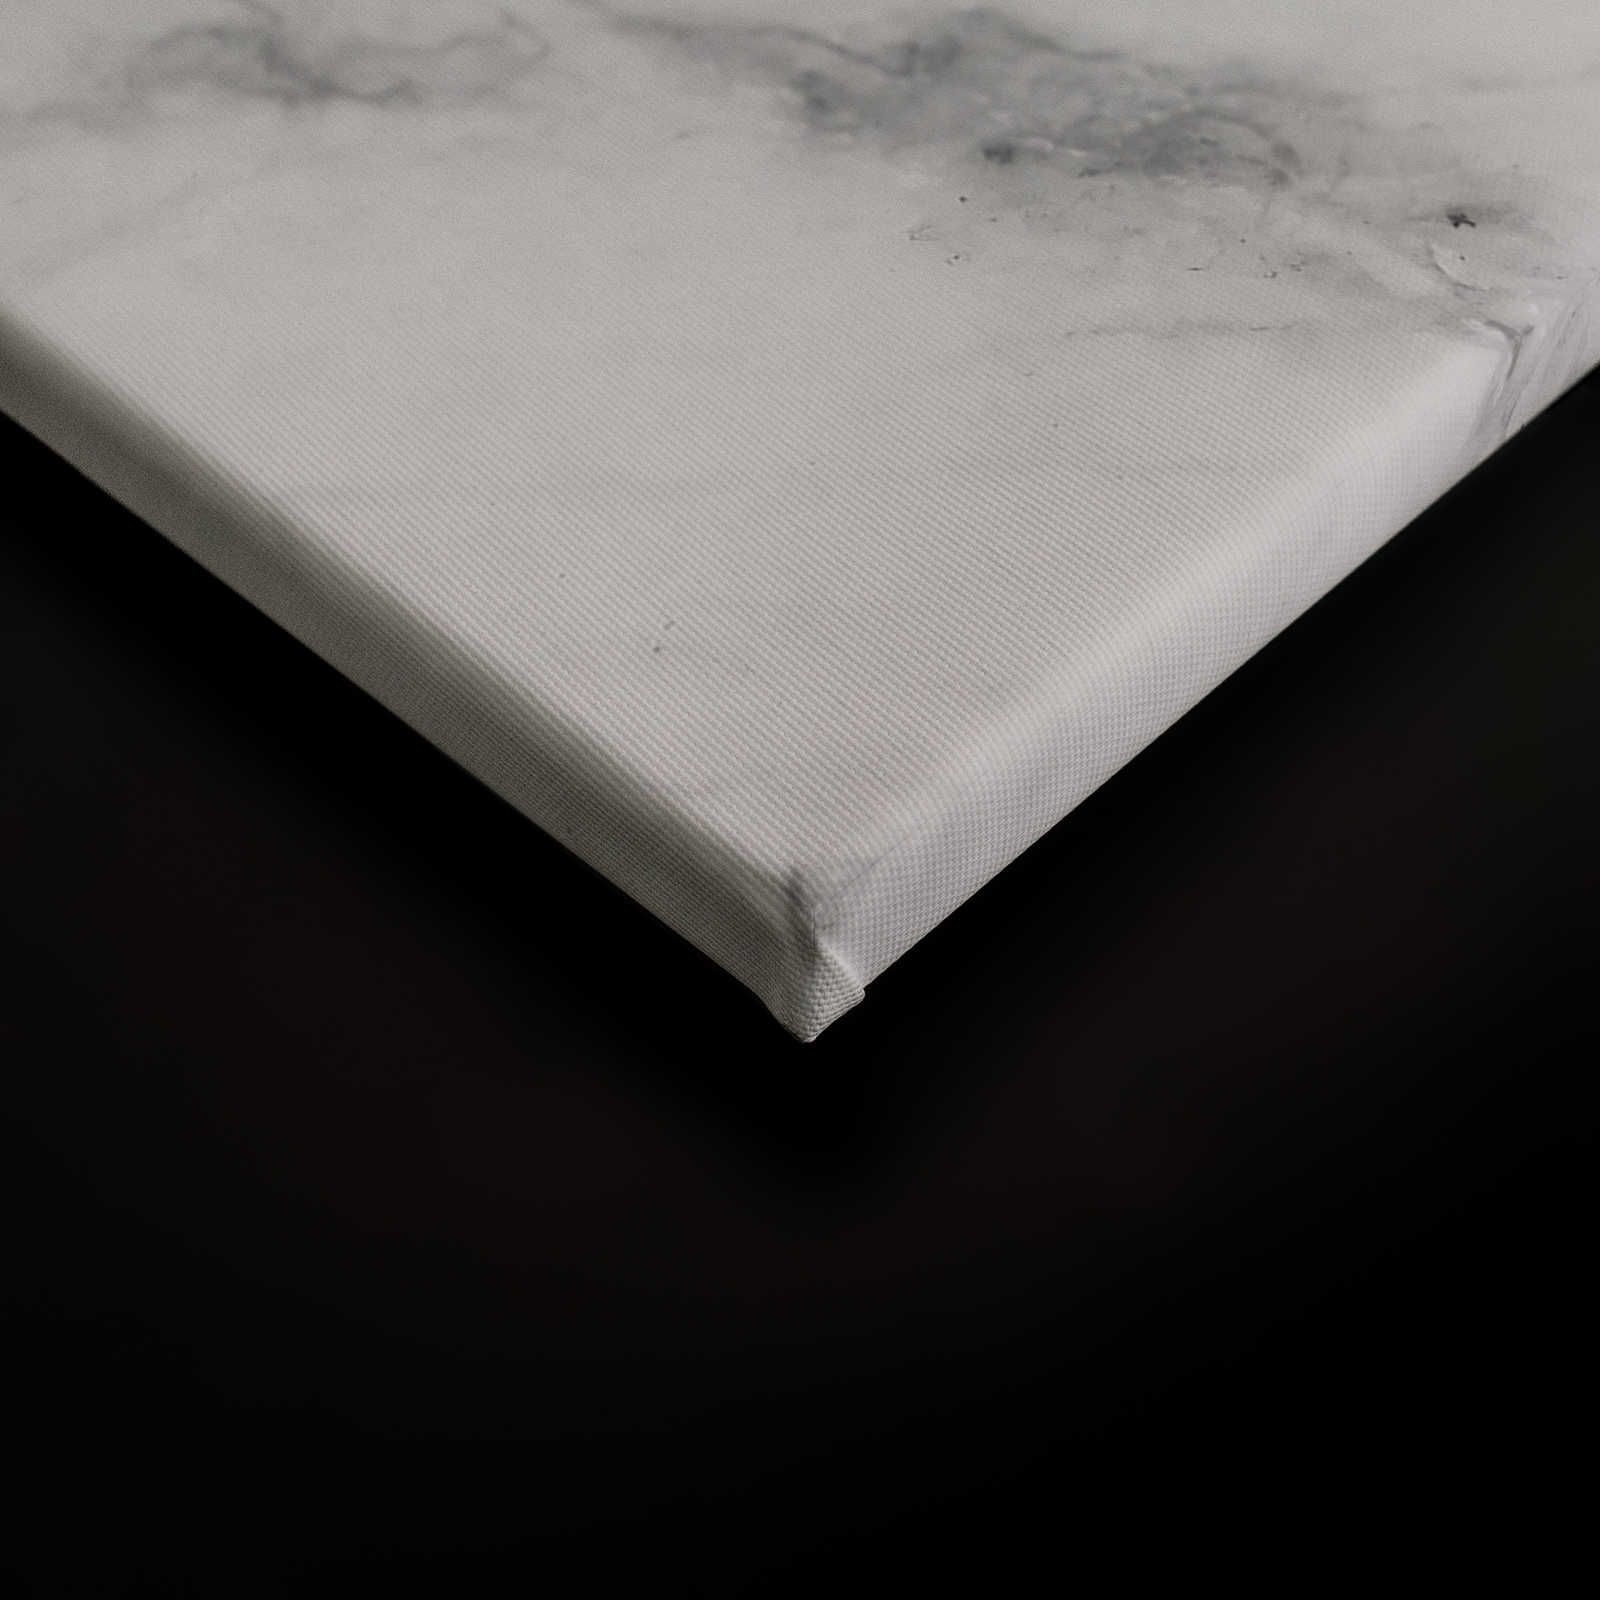             Black and White Canvas Painting Marble with Nature Details - 0.90 m x 0.60 m
        